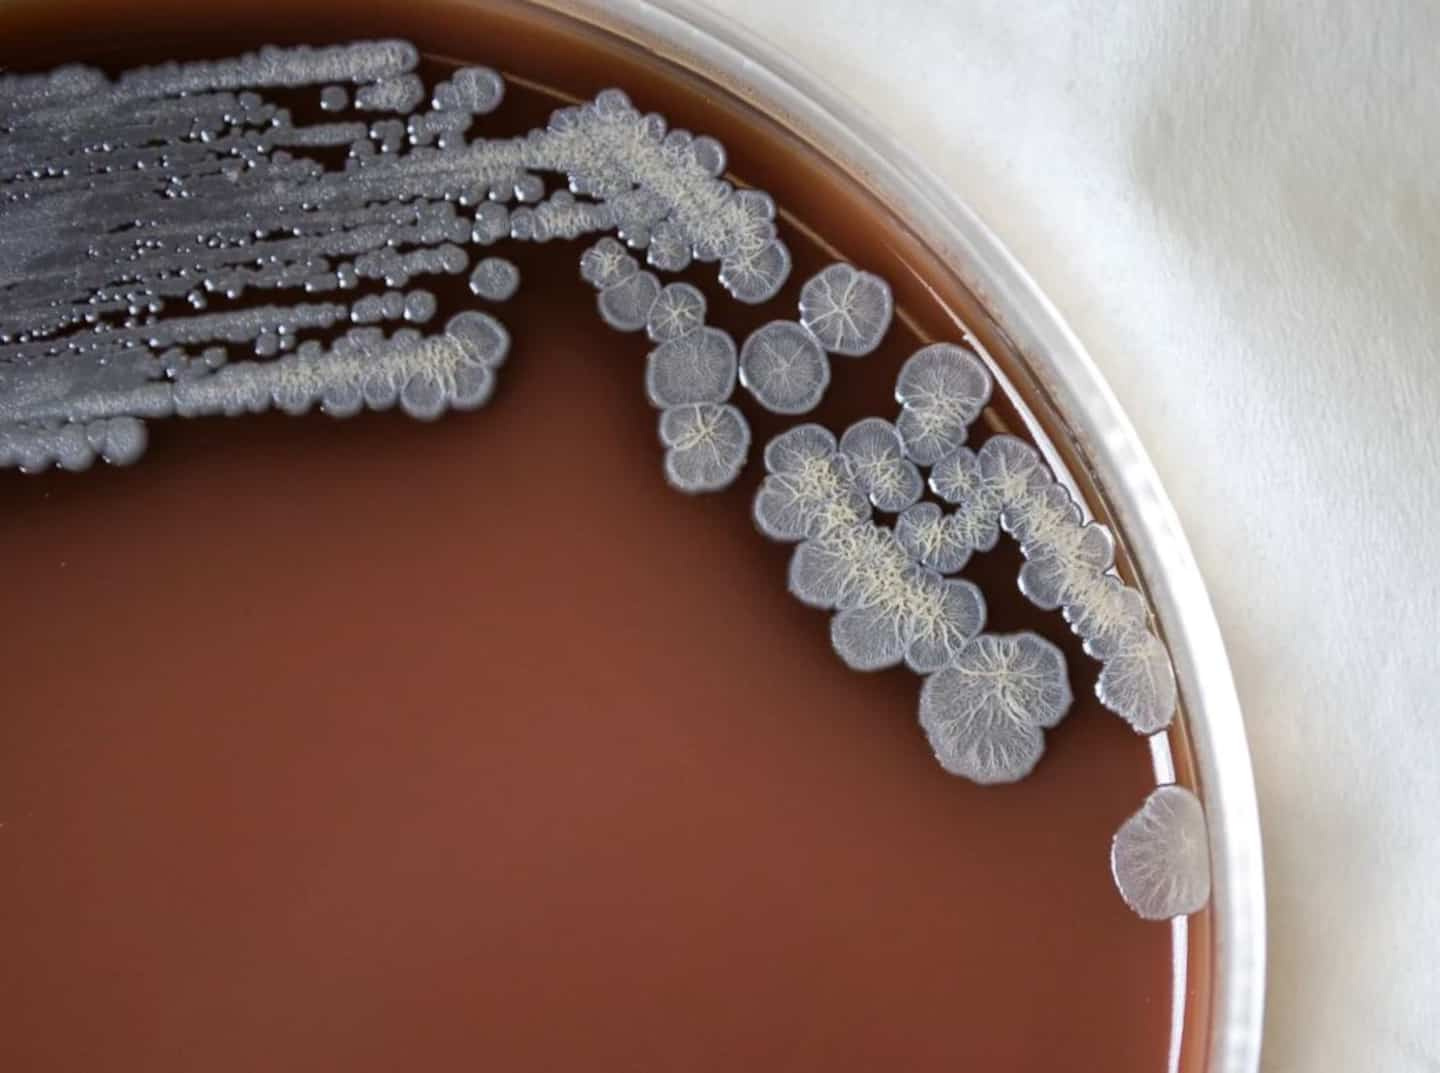 A bacterium causing a serious infectious disease detected in the United States